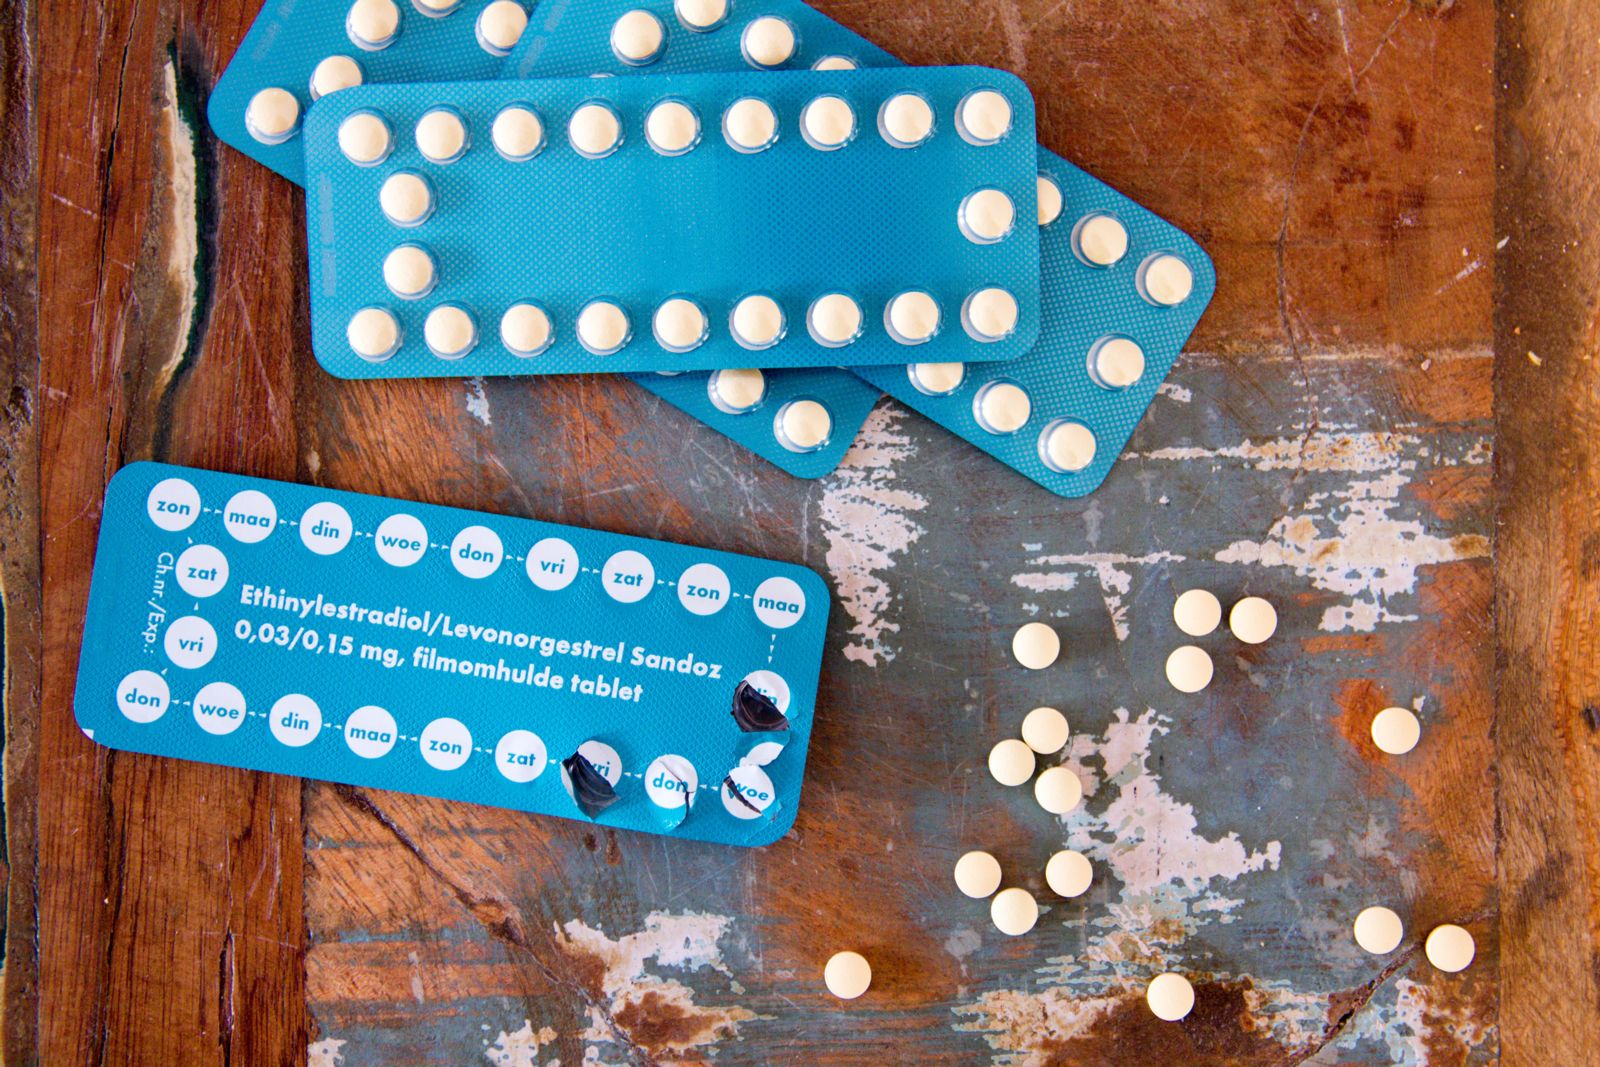 Incomplete information on emergency contraception drugs is risking women’s health